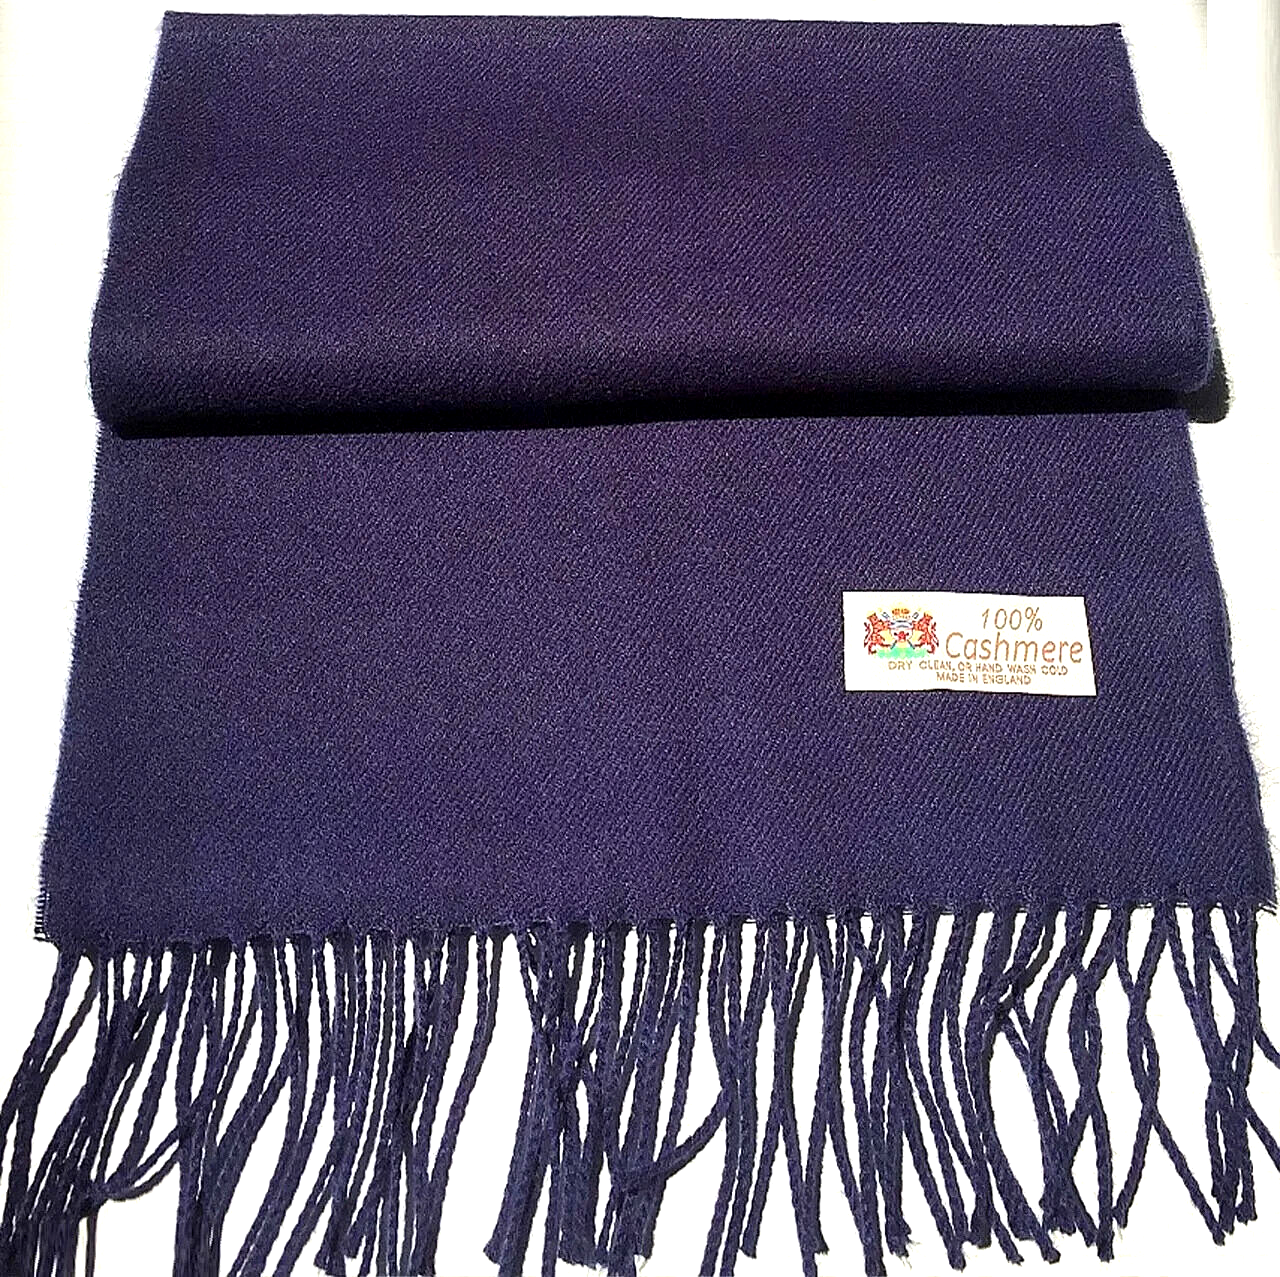 Primary image for Men's Winter Scarf 100% Cashmere Solid Navy Blue Made in England Warm Wool Wrap